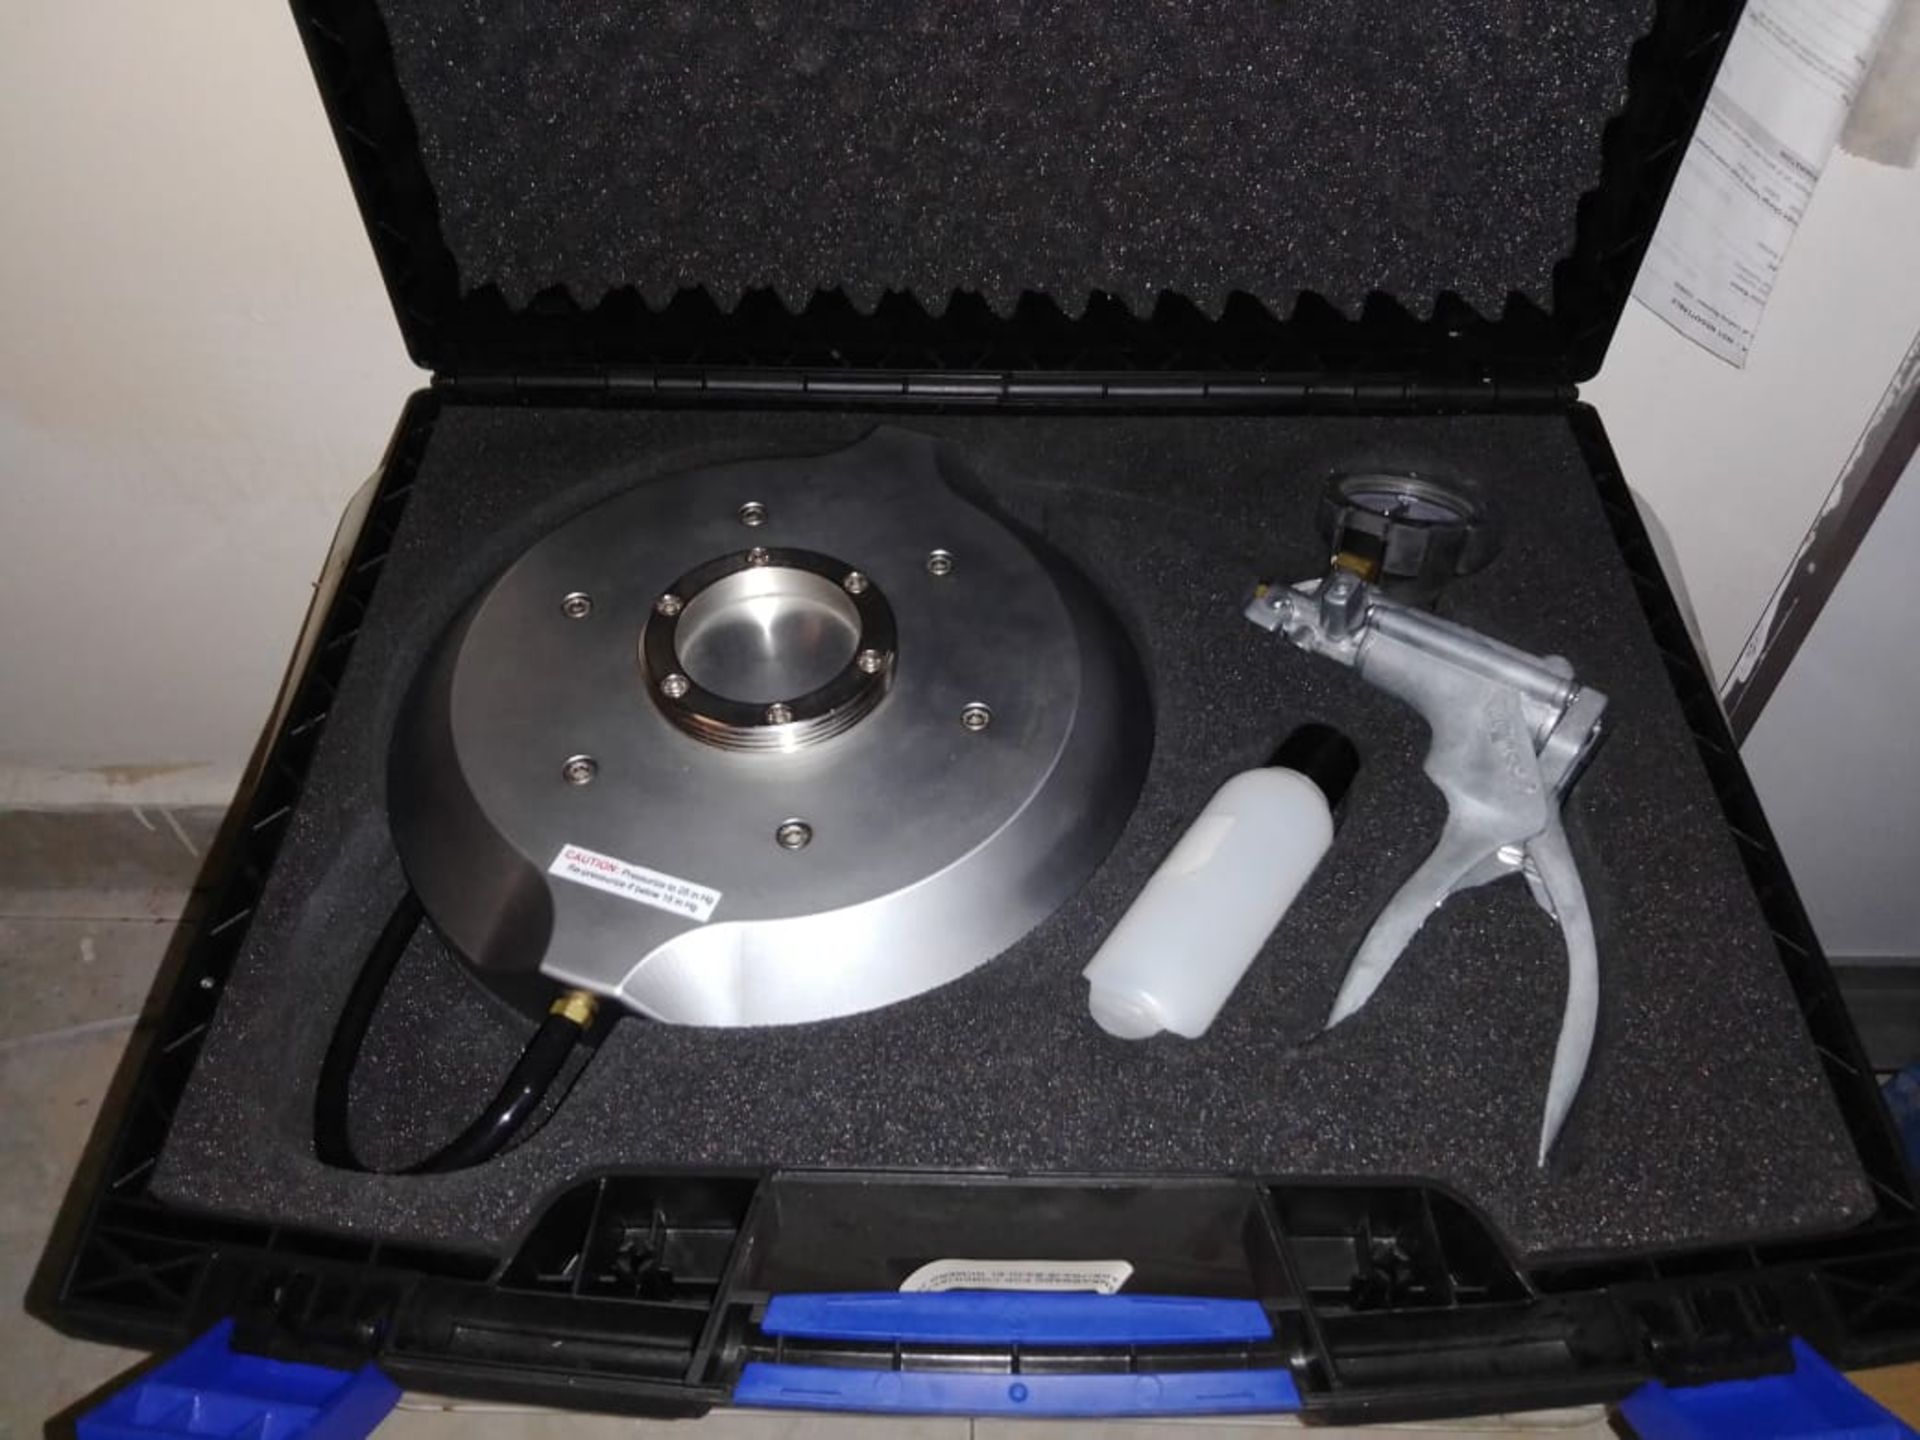 2012 FARO Coordinate measuring device with accessories and mobile base, Model EDGE - Image 7 of 24